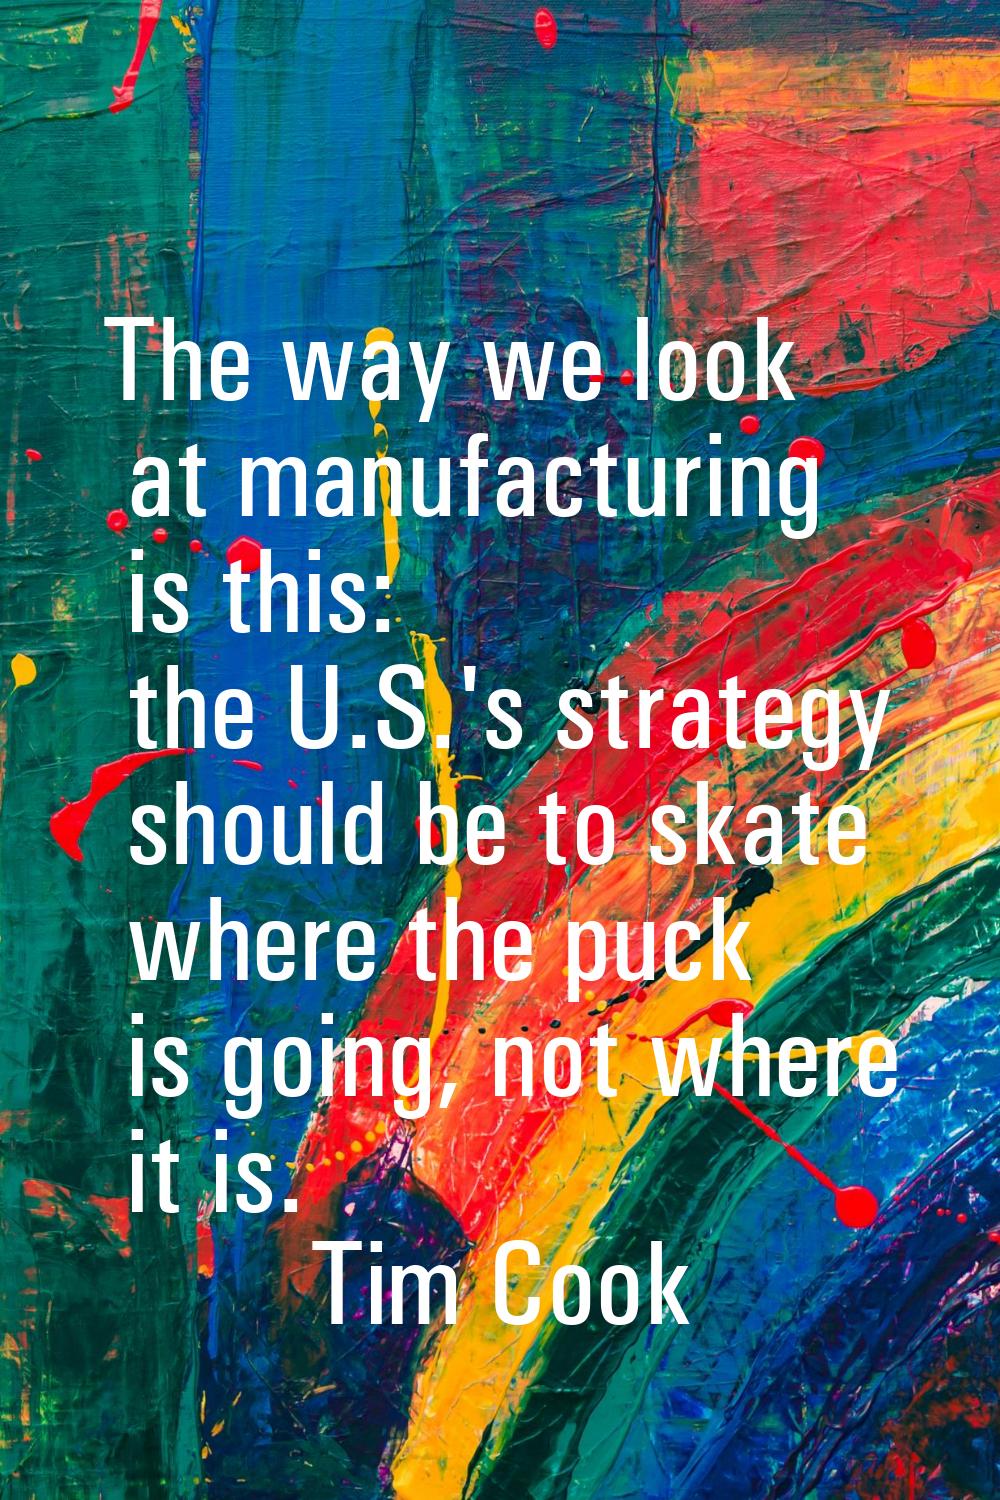 The way we look at manufacturing is this: the U.S.'s strategy should be to skate where the puck is 